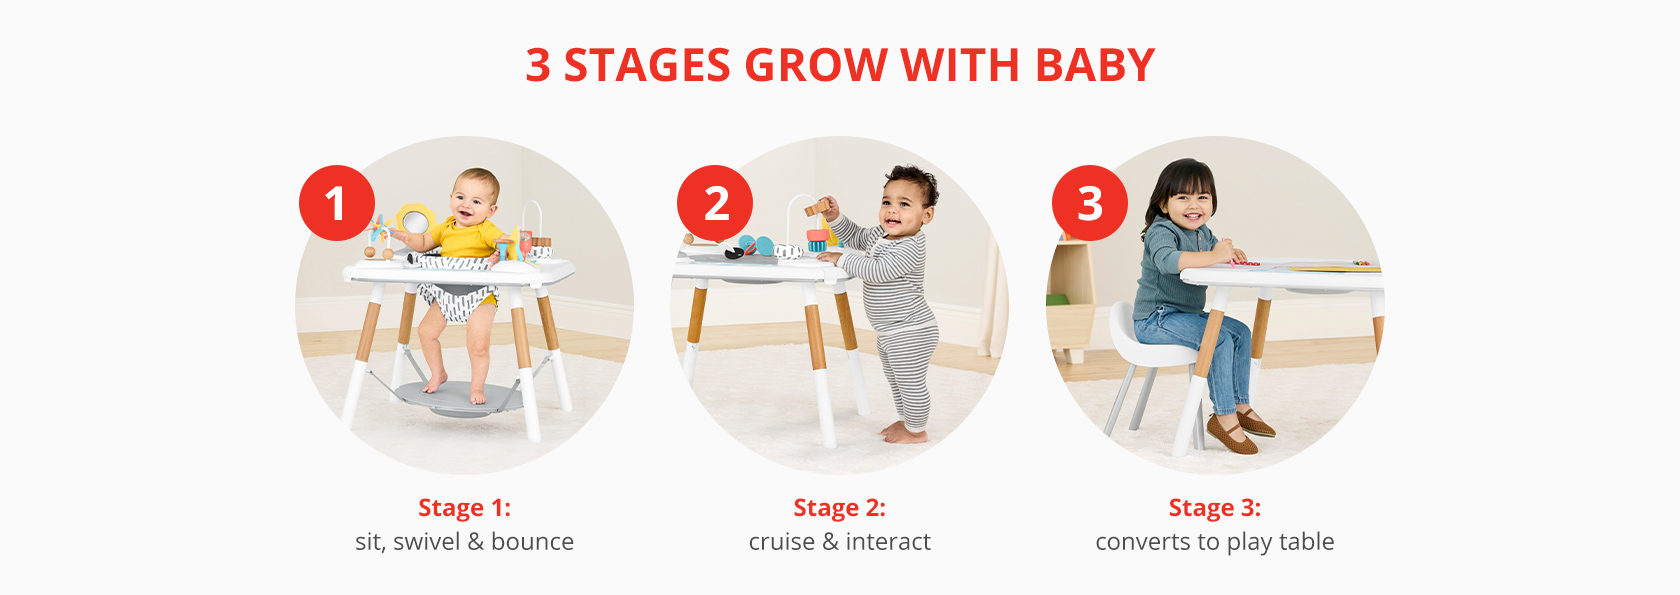 Discoverosity Montessori-Inspired Activity Center grows with baby in 3 stages and converts to a play table when child is older.